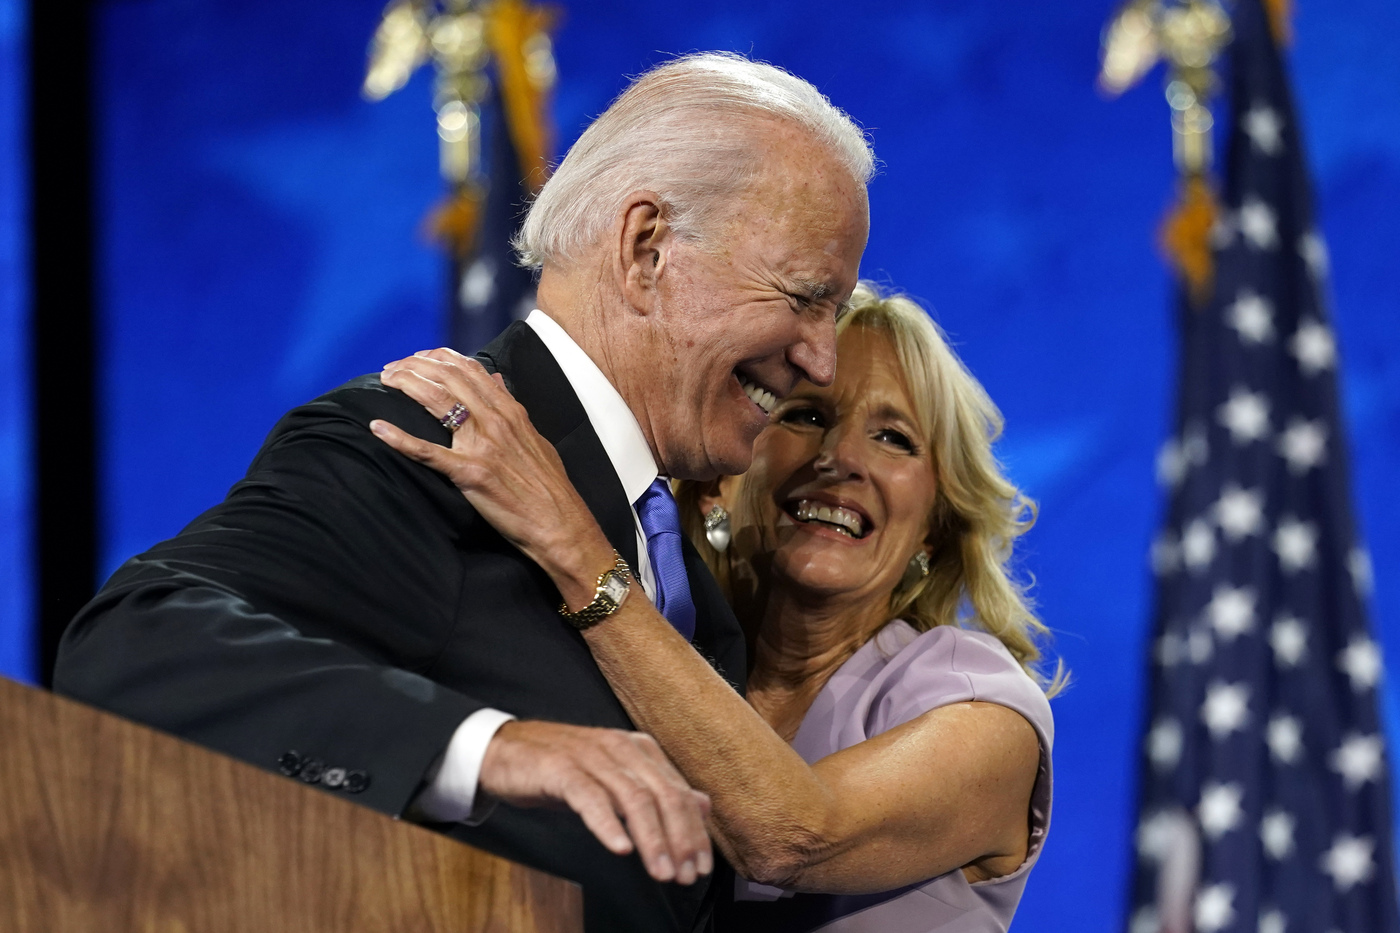 FILE - In this Aug. 20, 2020, file photo Democratic presidential candidate former Vice President Joe Biden hugs his wife Jill Biden after his speech during the fourth day of the Democratic National Convention at the Chase Center in Wilmington, Del. (AP Photo/Andrew Harnik, File)